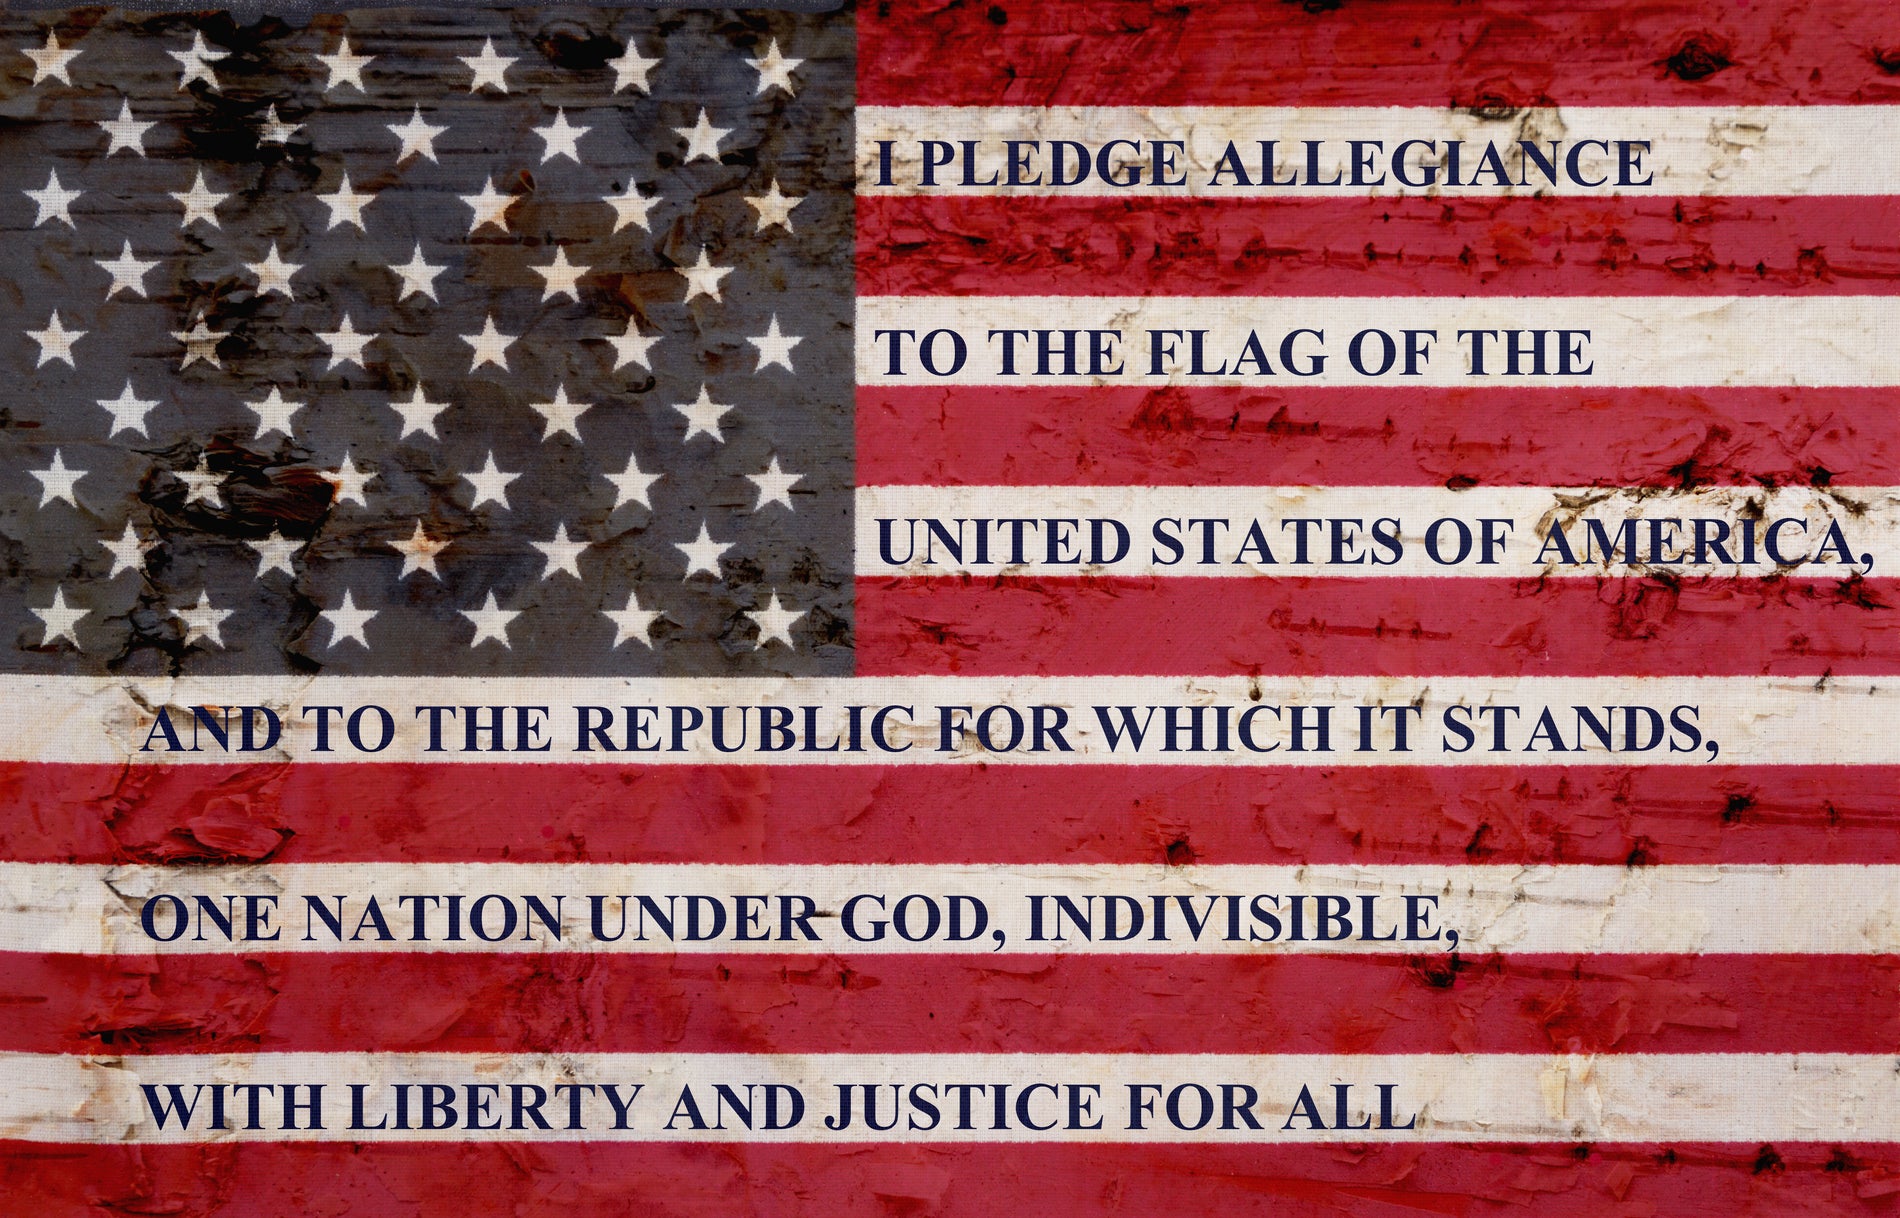 About The Pledge of Allegiance